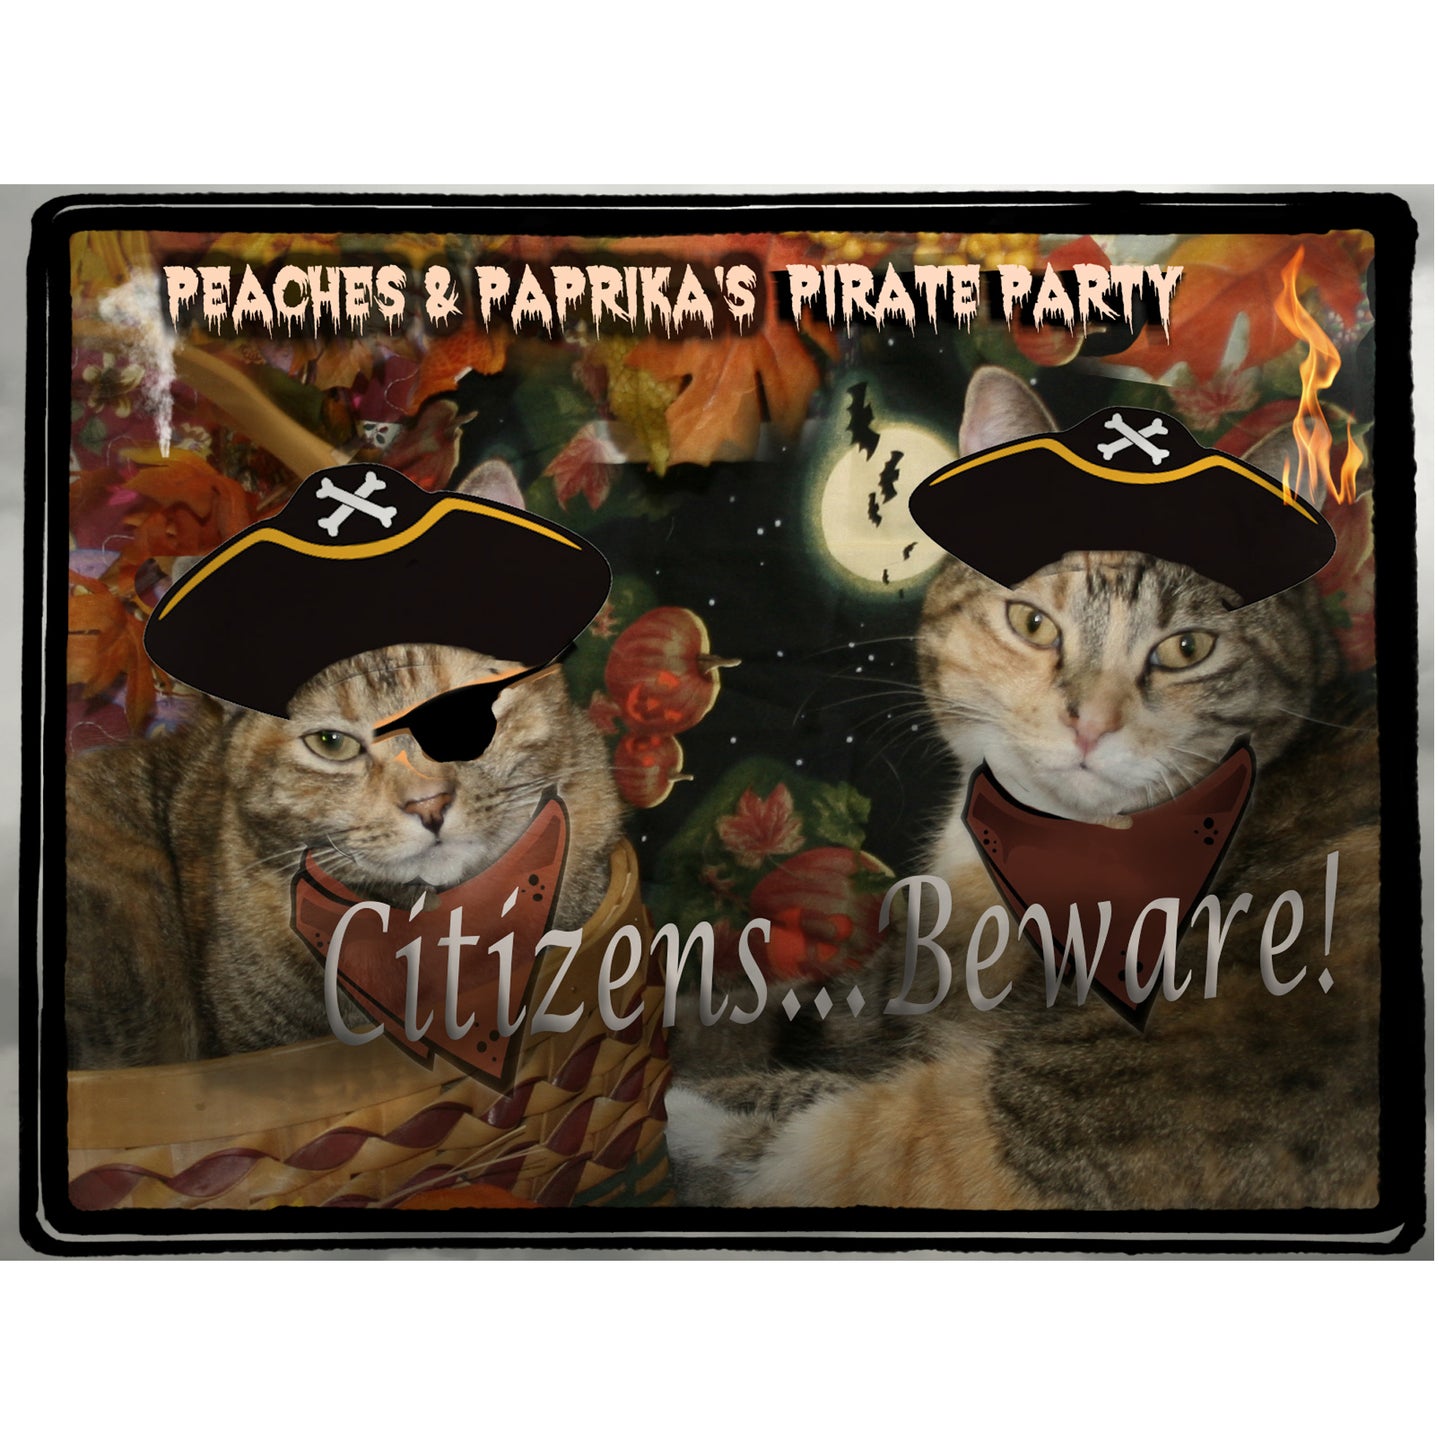 Meow Like a Pirate Day Digital Card - Peaches & Paprika cats